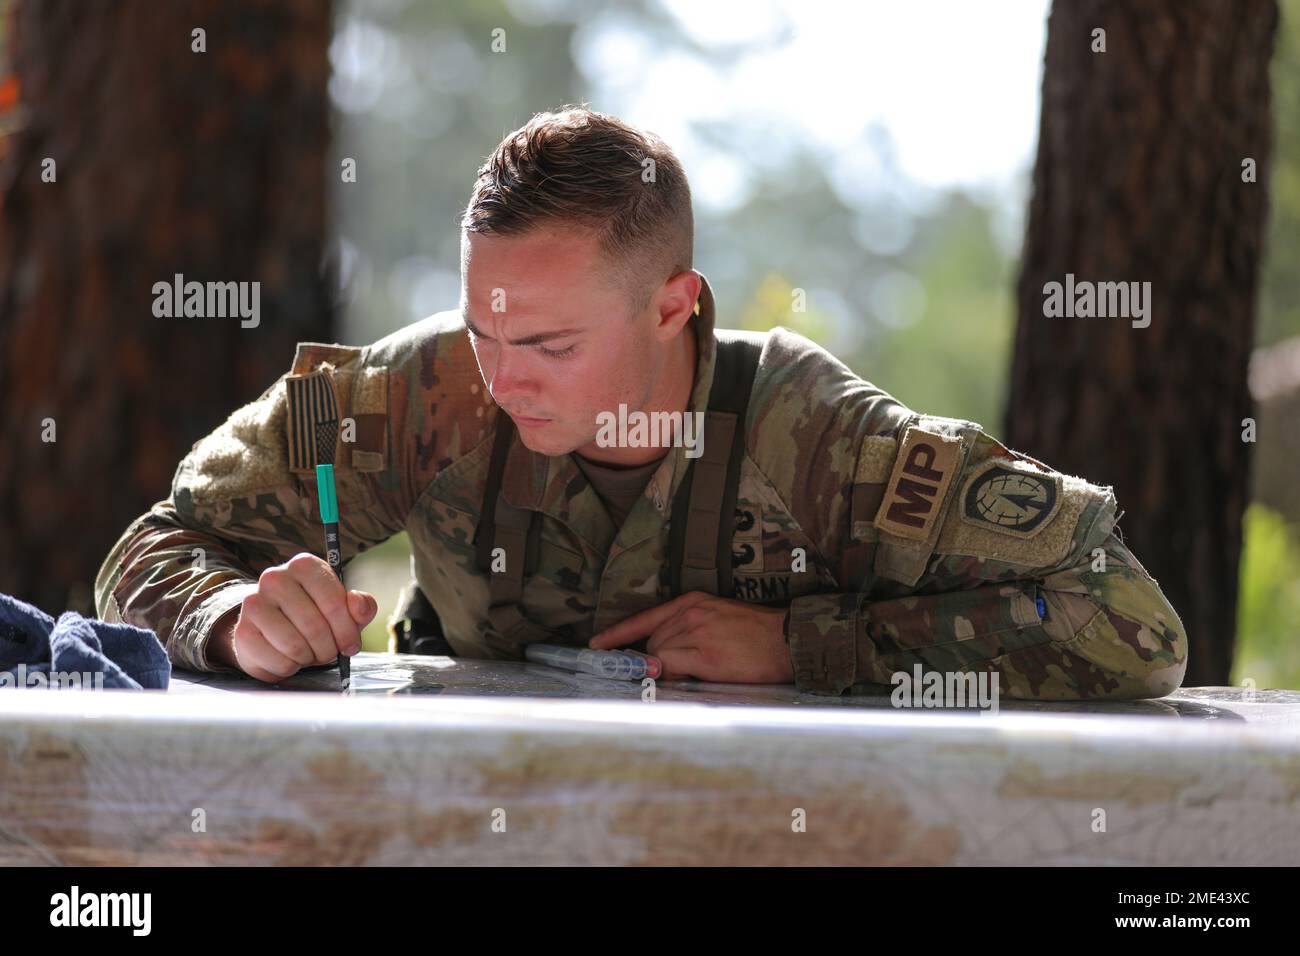 https://c8.alamy.com/comp/2ME43XC/us-army-staff-sgt-drew-beam-assigned-to-the-16th-military-police-brigades-best-squad-identifies-terrain-features-and-parts-of-a-military-map-during-the-xviii-airborne-corps-best-squad-competition-on-fort-stewart-georgia-june-28-2022-the-best-squad-competition-tests-squads-physical-technical-and-tactical-abilities-under-stress-and-fatigue-to-determine-which-squad-from-the-xviii-airborne-corps-will-advance-to-the-forces-command-best-squad-competition-in-the-coming-months-2ME43XC.jpg